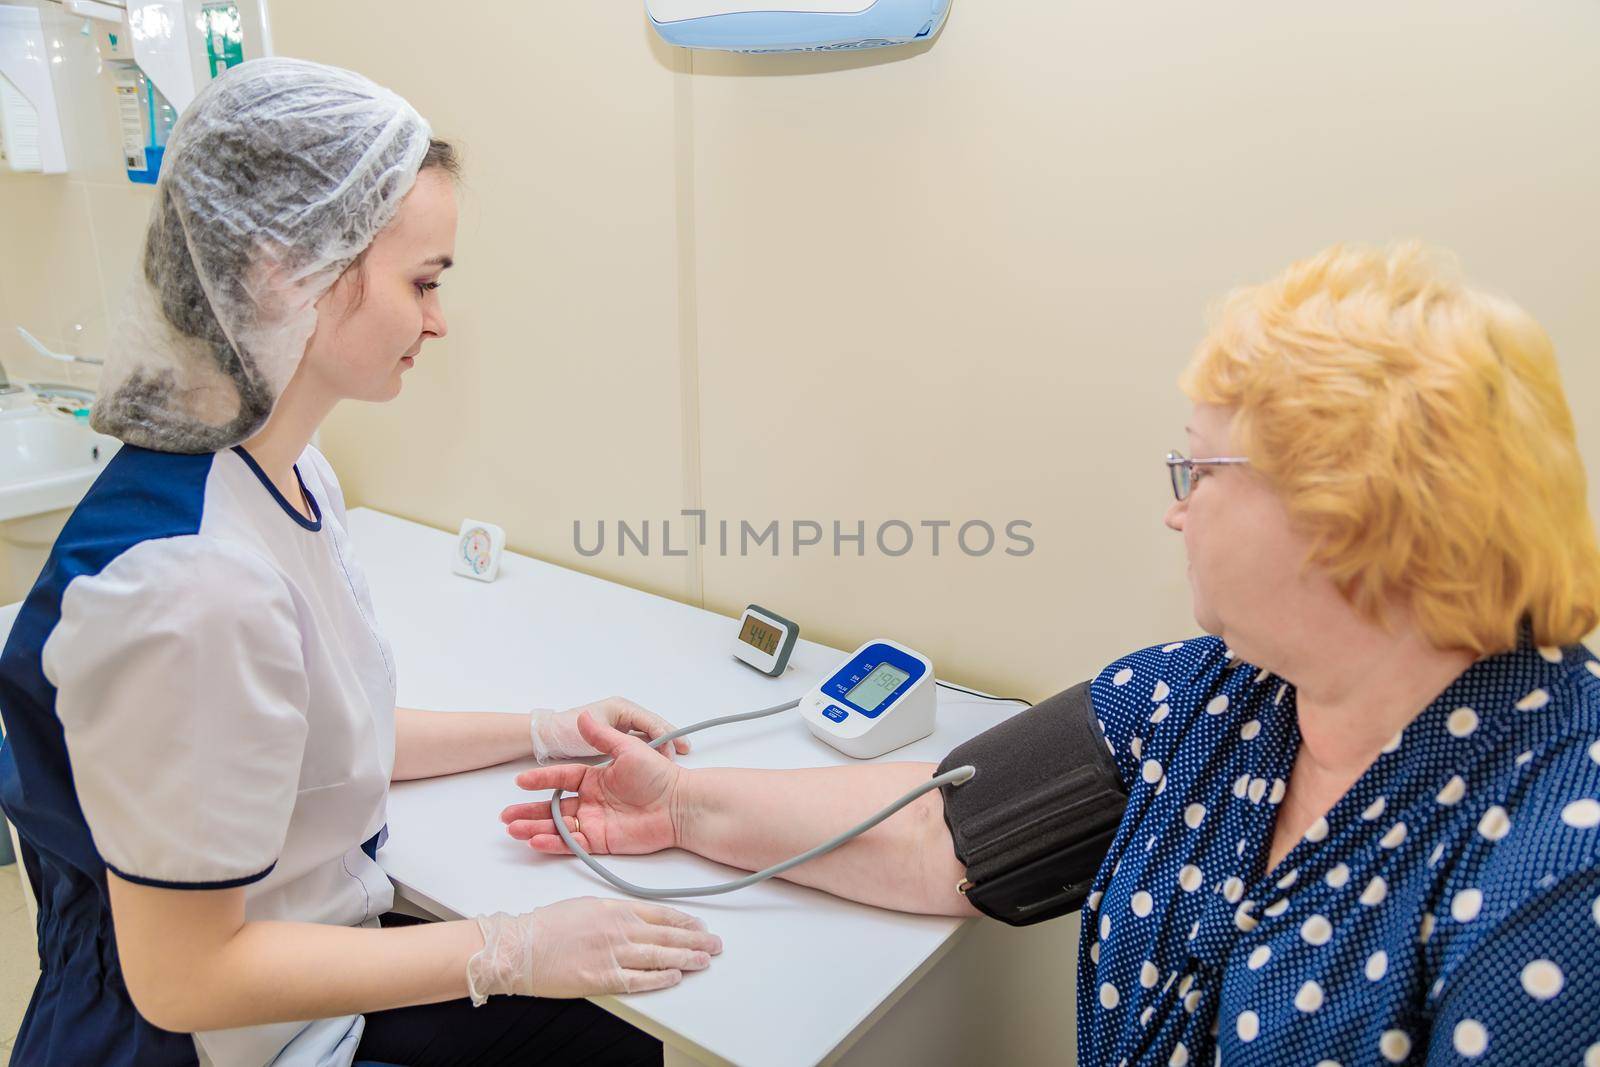 A nurse in a polyclinic measures the blood pressure of a woman with a device. Healthcare by Yurich32